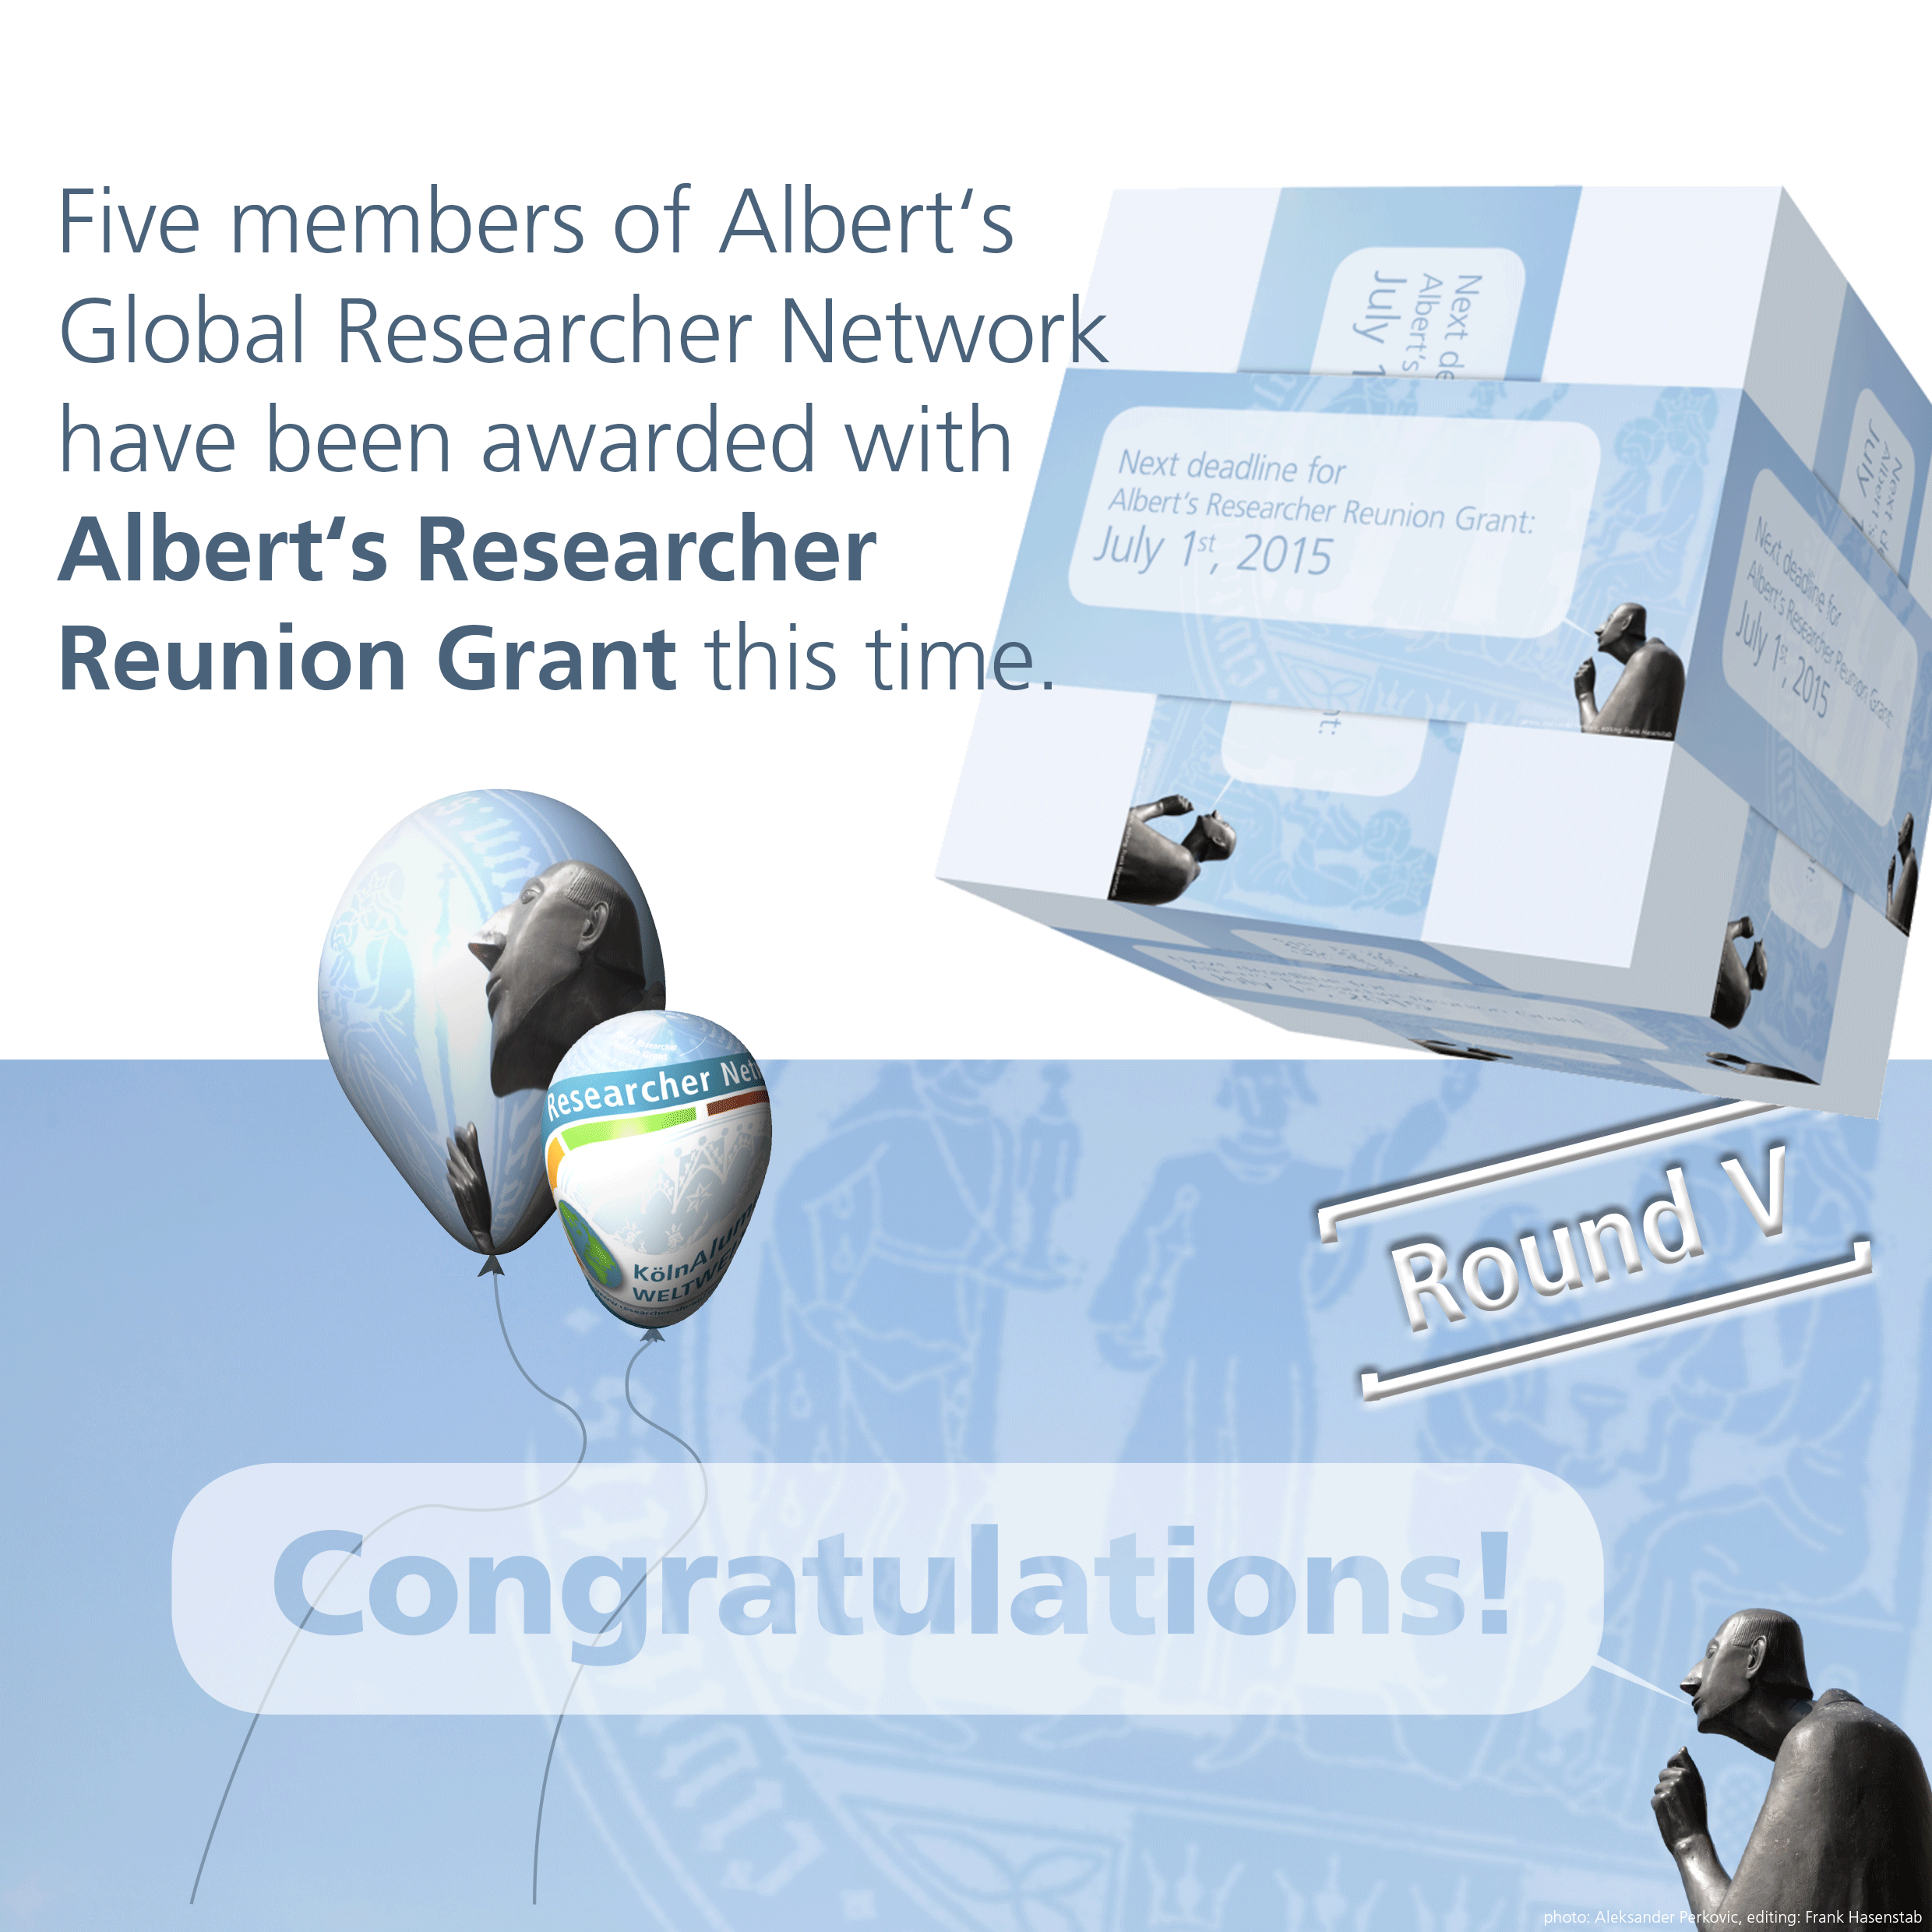 Congratulations: Five members of Albert's Global Researcher Network have been awarded with Albert's Researcher Reunion Grant this time.